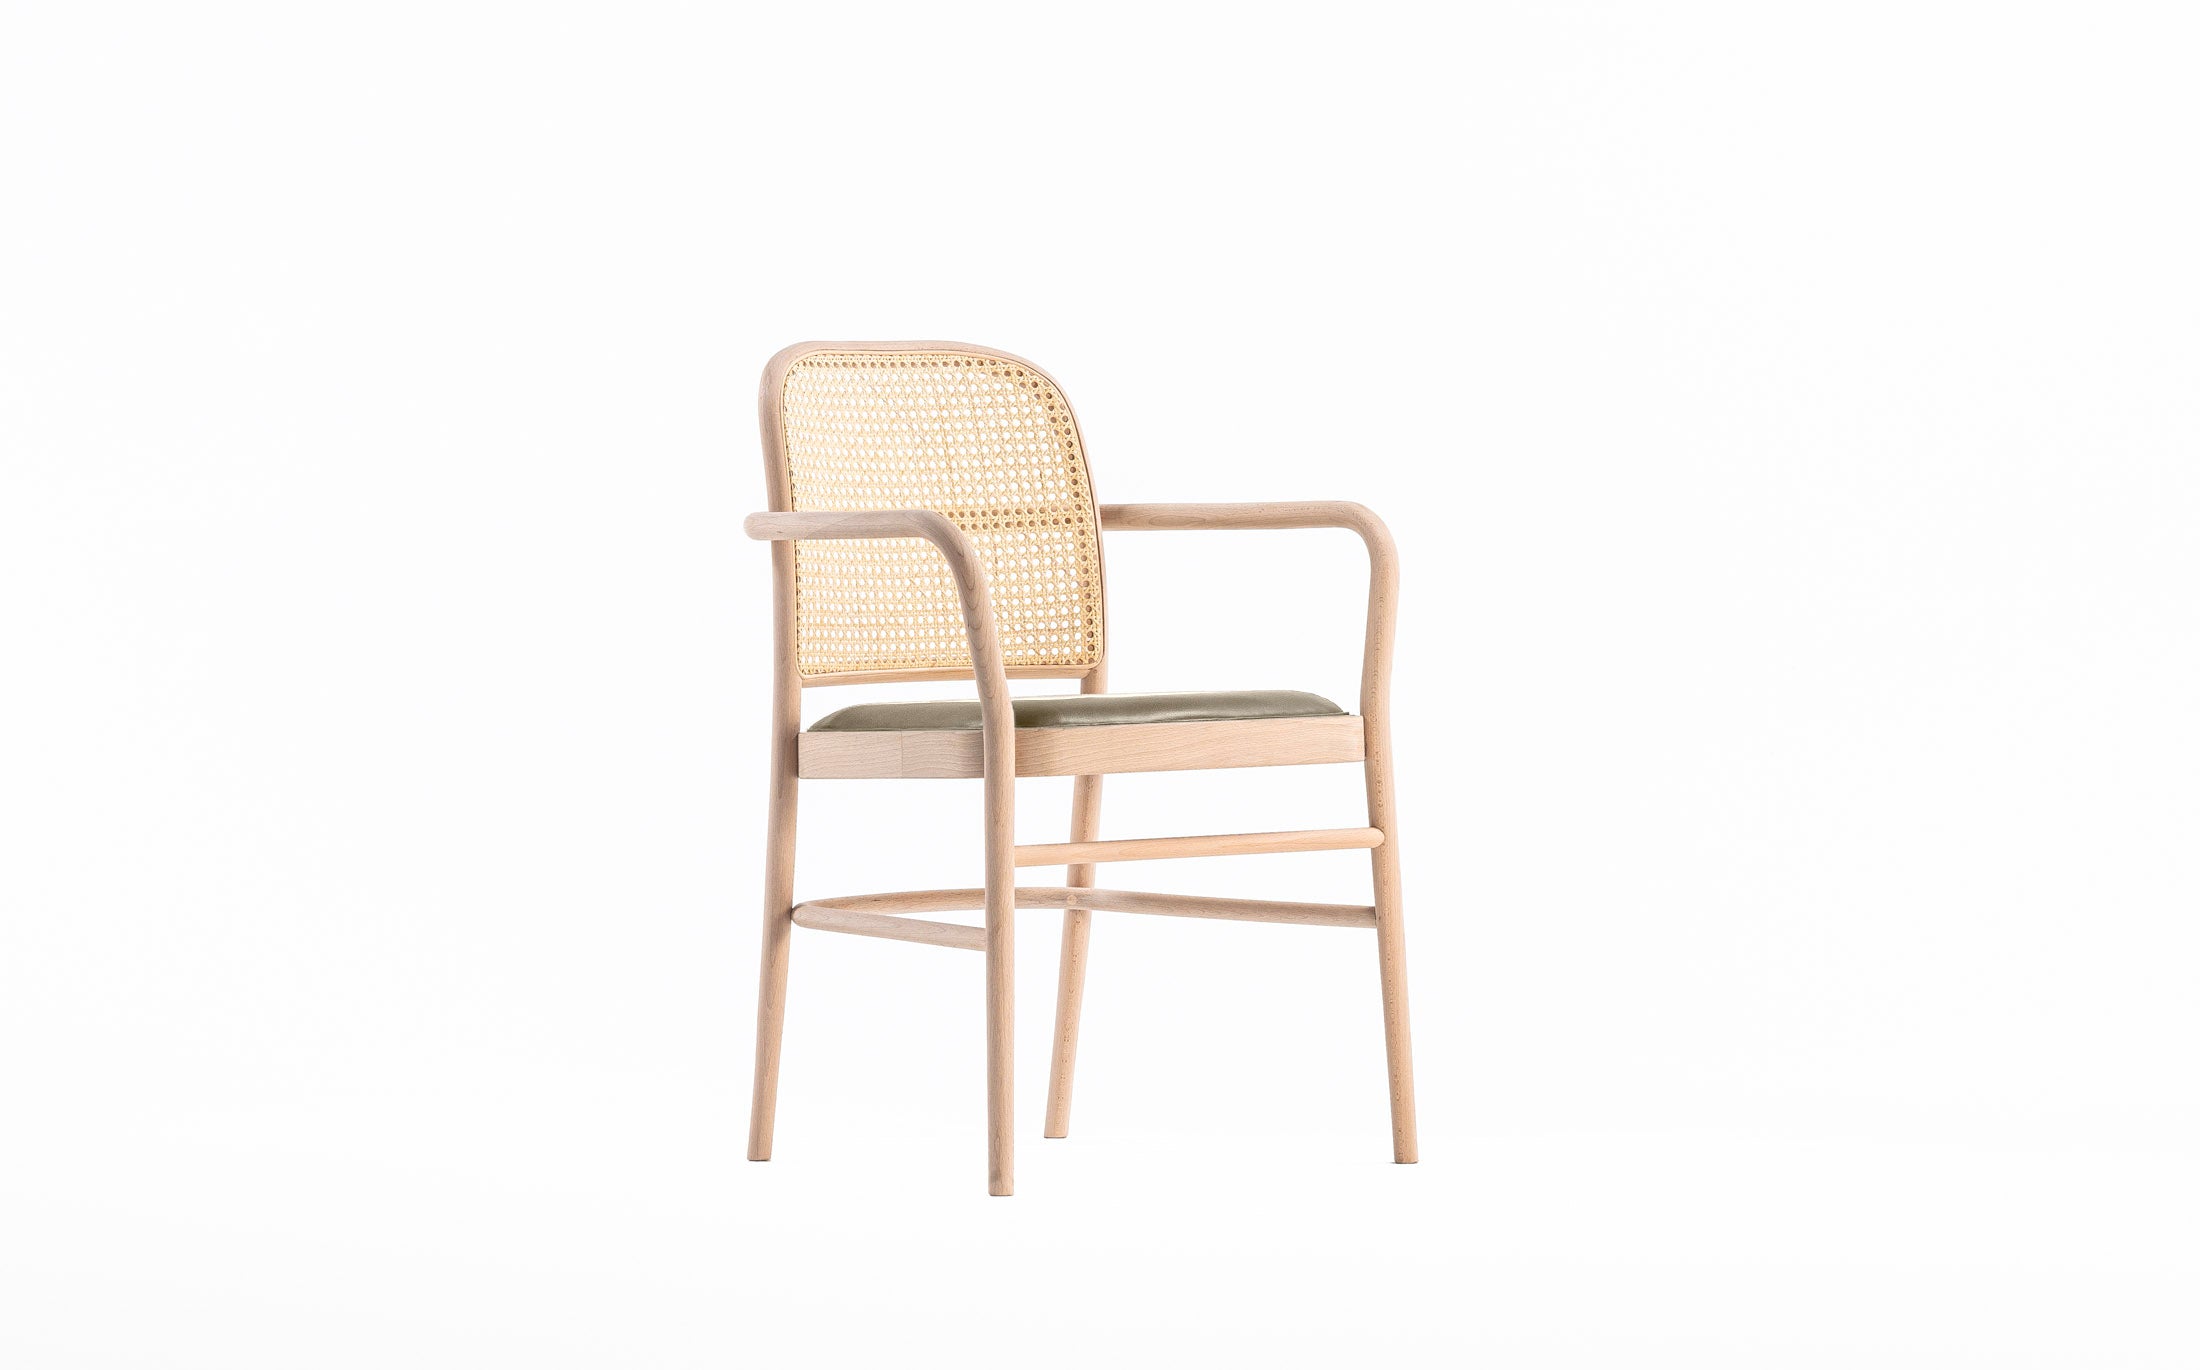 The bent armchair #Seat materials_smooth leather 40108